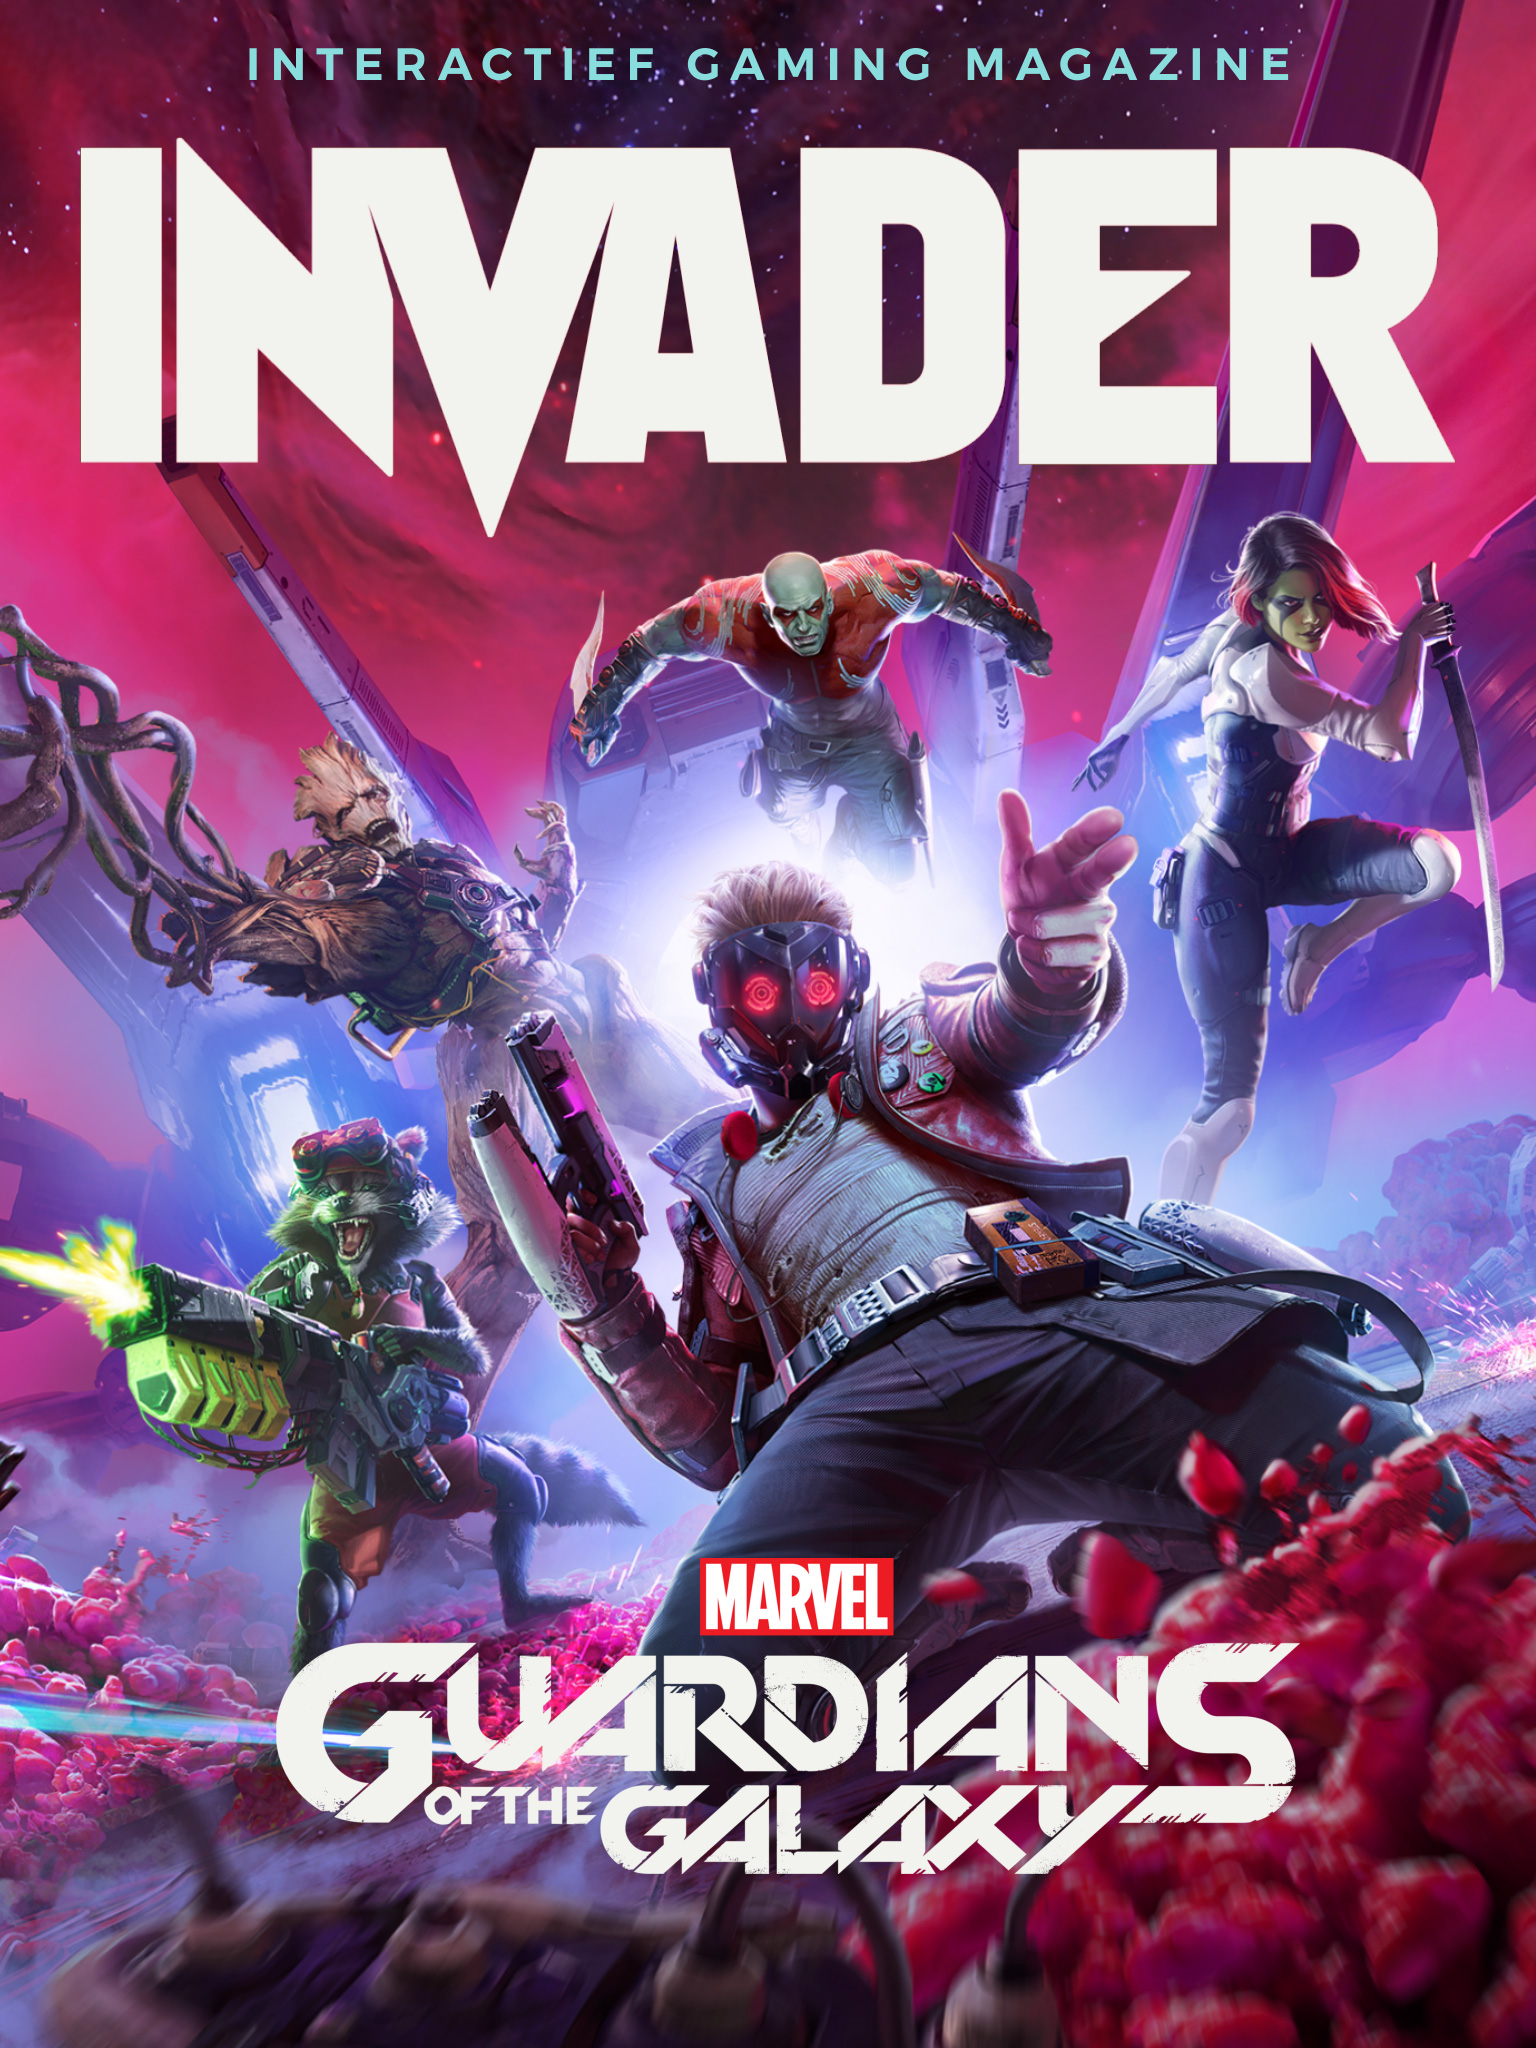 Cover Inavder86 Guardians iPad 0 00 22 05